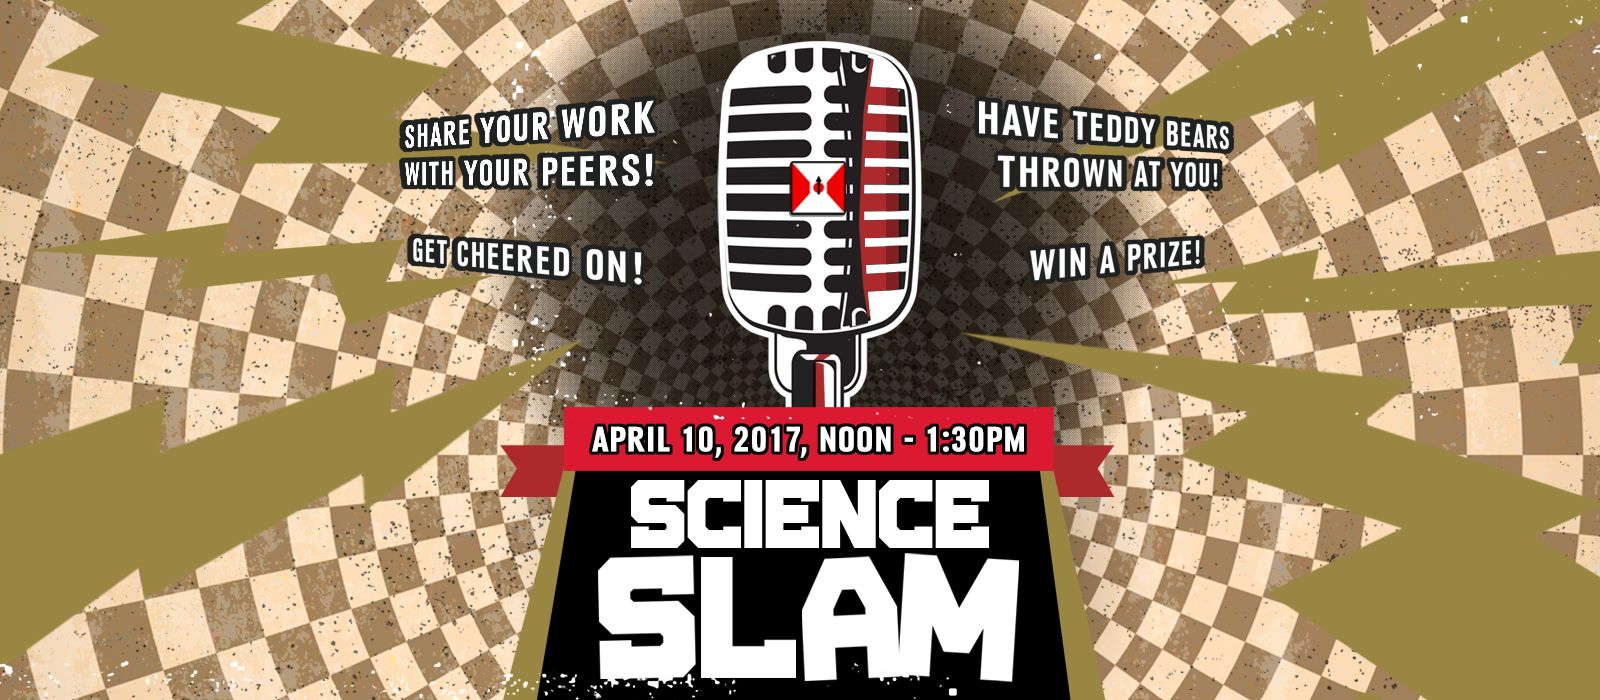 Photo Credit: Science Slam poster